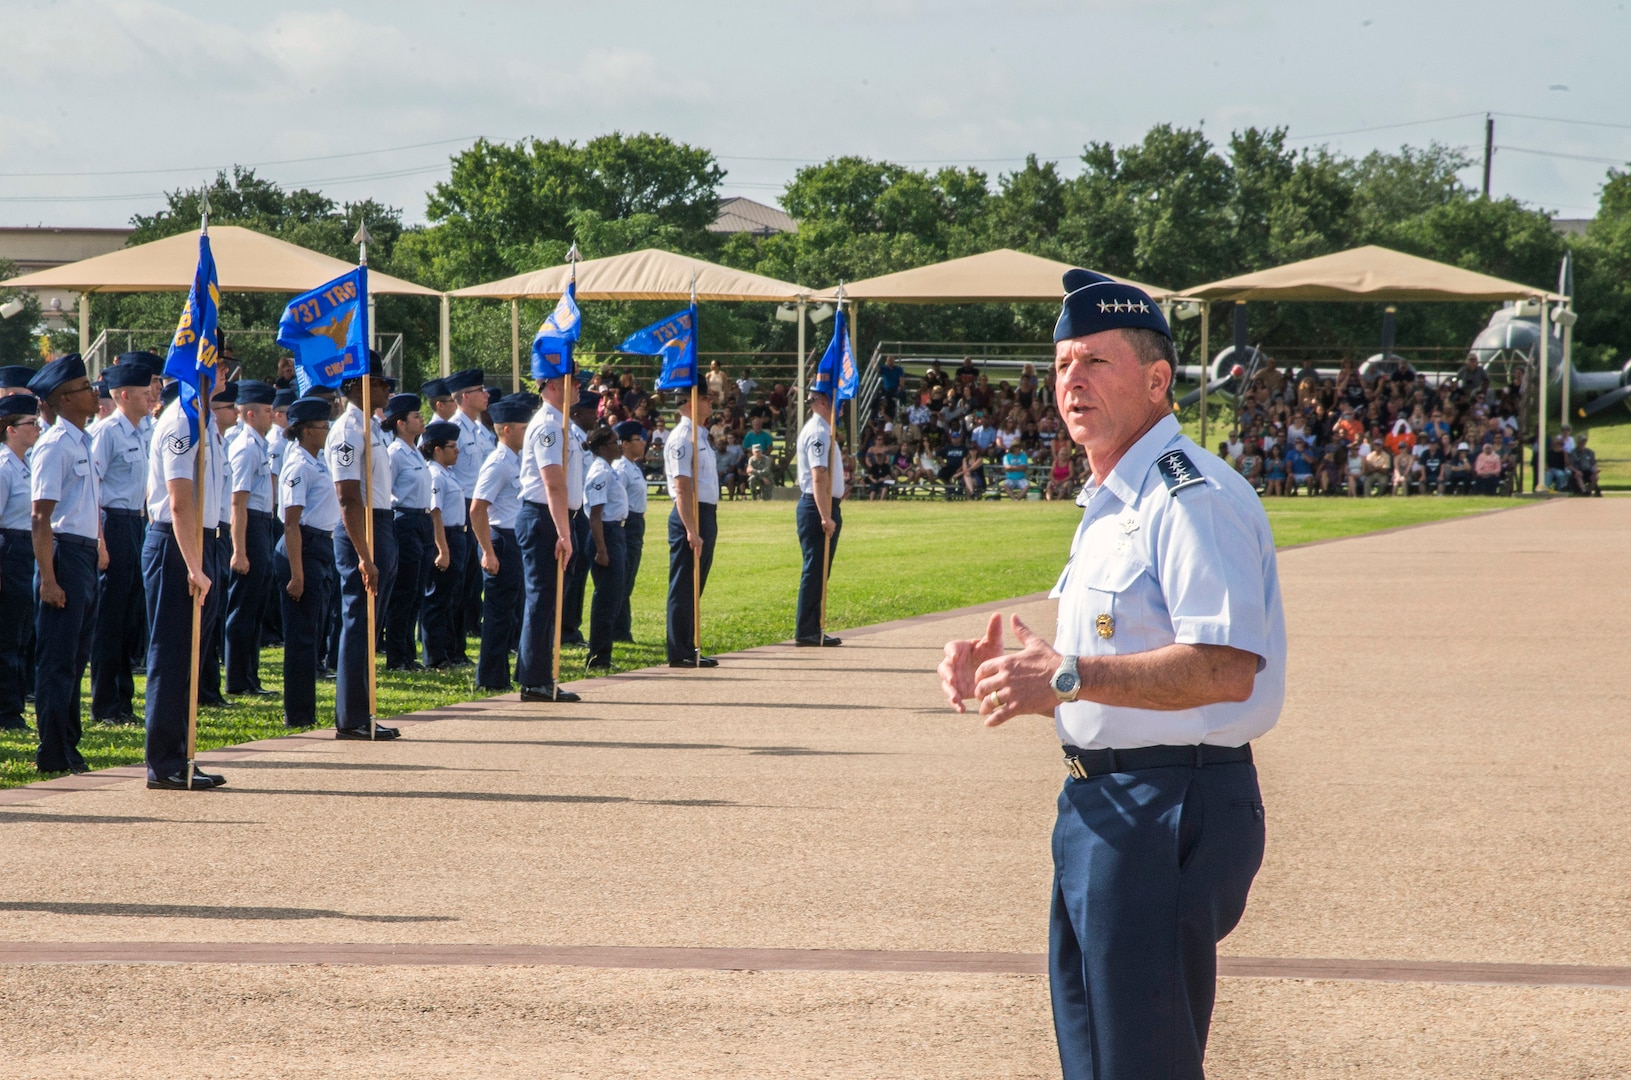 Air Force Chief of Staff Gen. David Goldfein addresses Airmen during a basic military training graduation June 16, 2017, at Joint Base San Antonio-Lackland. Goldfein toured various JBSA-Lackland facilities and met many 37th Training Wing Airmen during his two-day visit. Every enlisted Airmen begins their Air Force career at basic military training. JBSA-Lackland is often referred to as the "Gateway to the Air Force," graduating about 39,000 Airmen annually. BMT is one of the missions of the 37th Training Wing, the largest training wing in the United States Air Force. (U.S. Air Force photo by Johnny Saldivar)